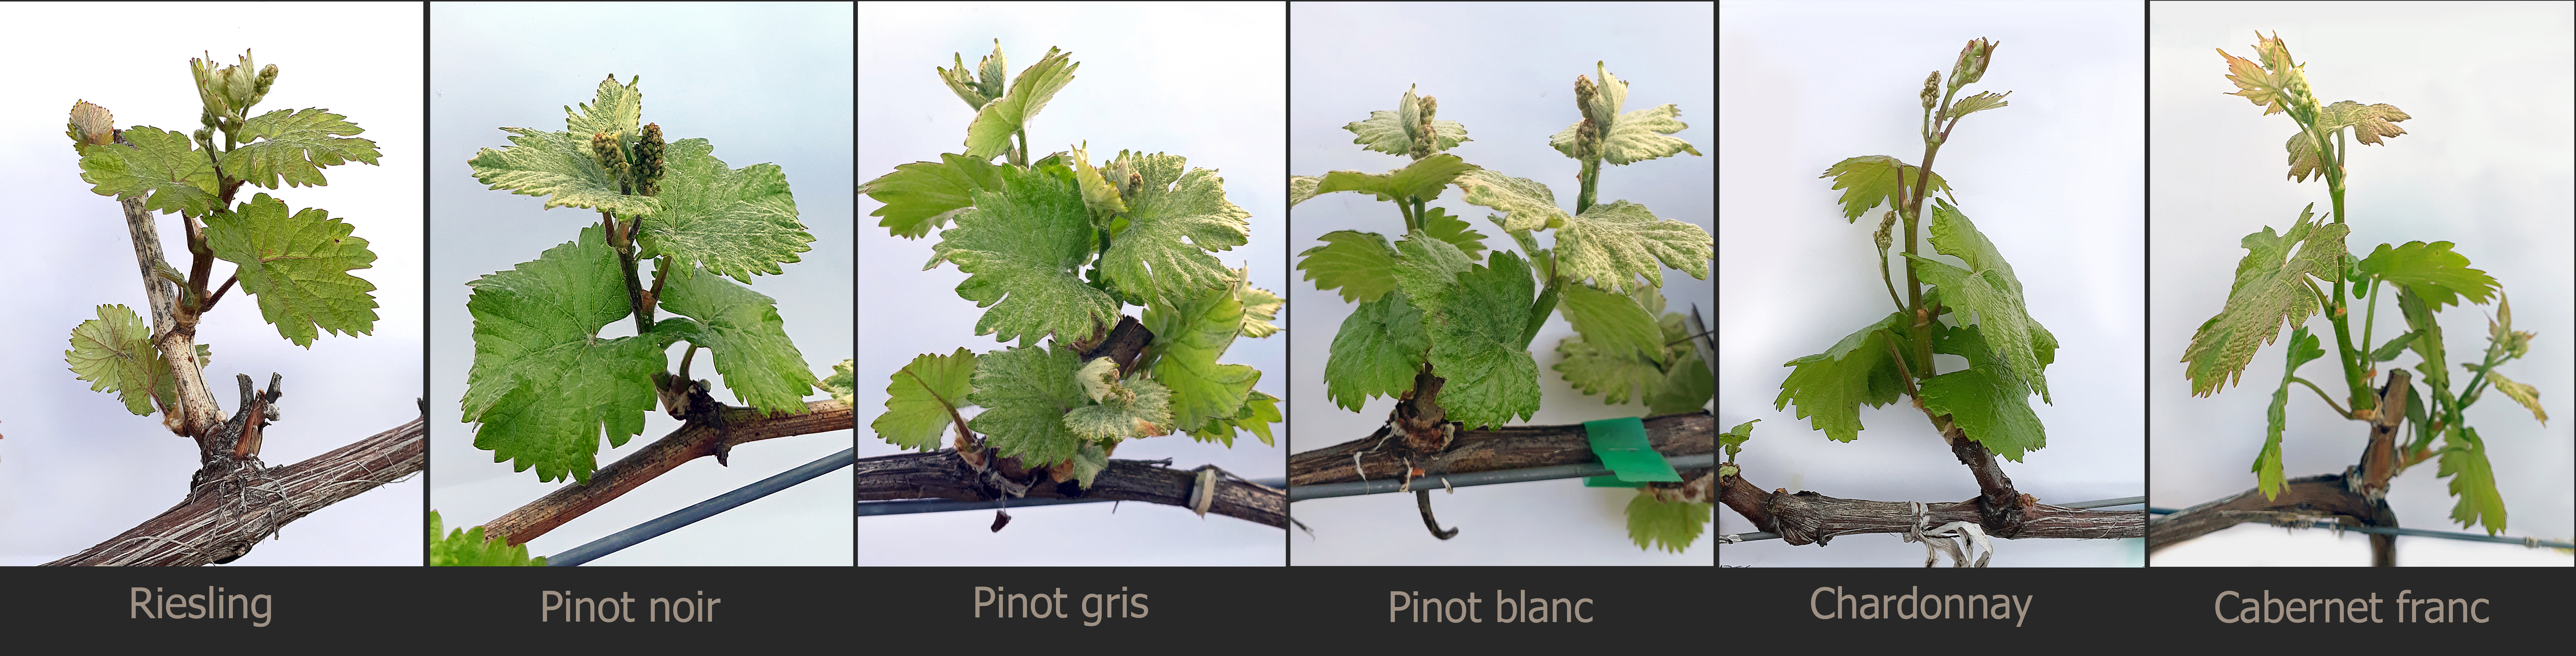 Vine growth stages.